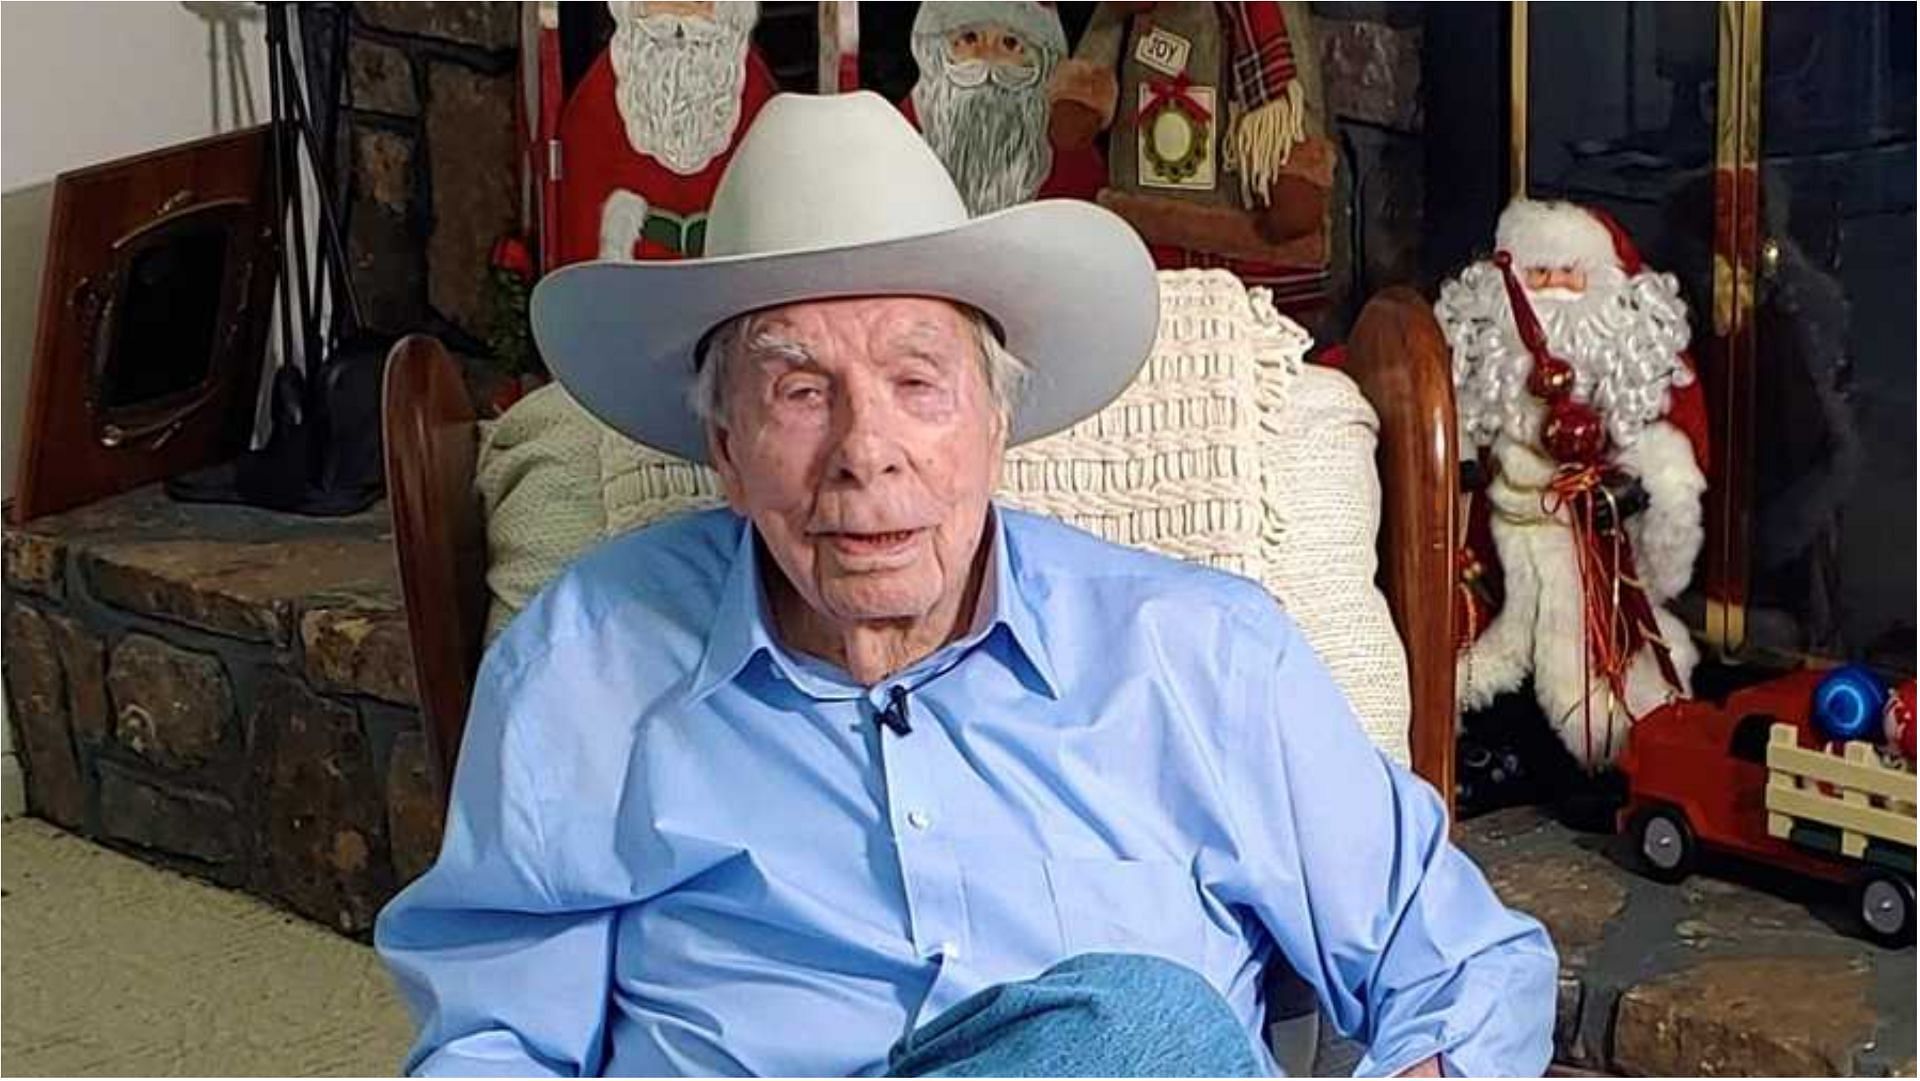 Country Boy Eddie Burns recently died at the age of 92 (Image via Robbin Shaner Harry Holder/Facebook)